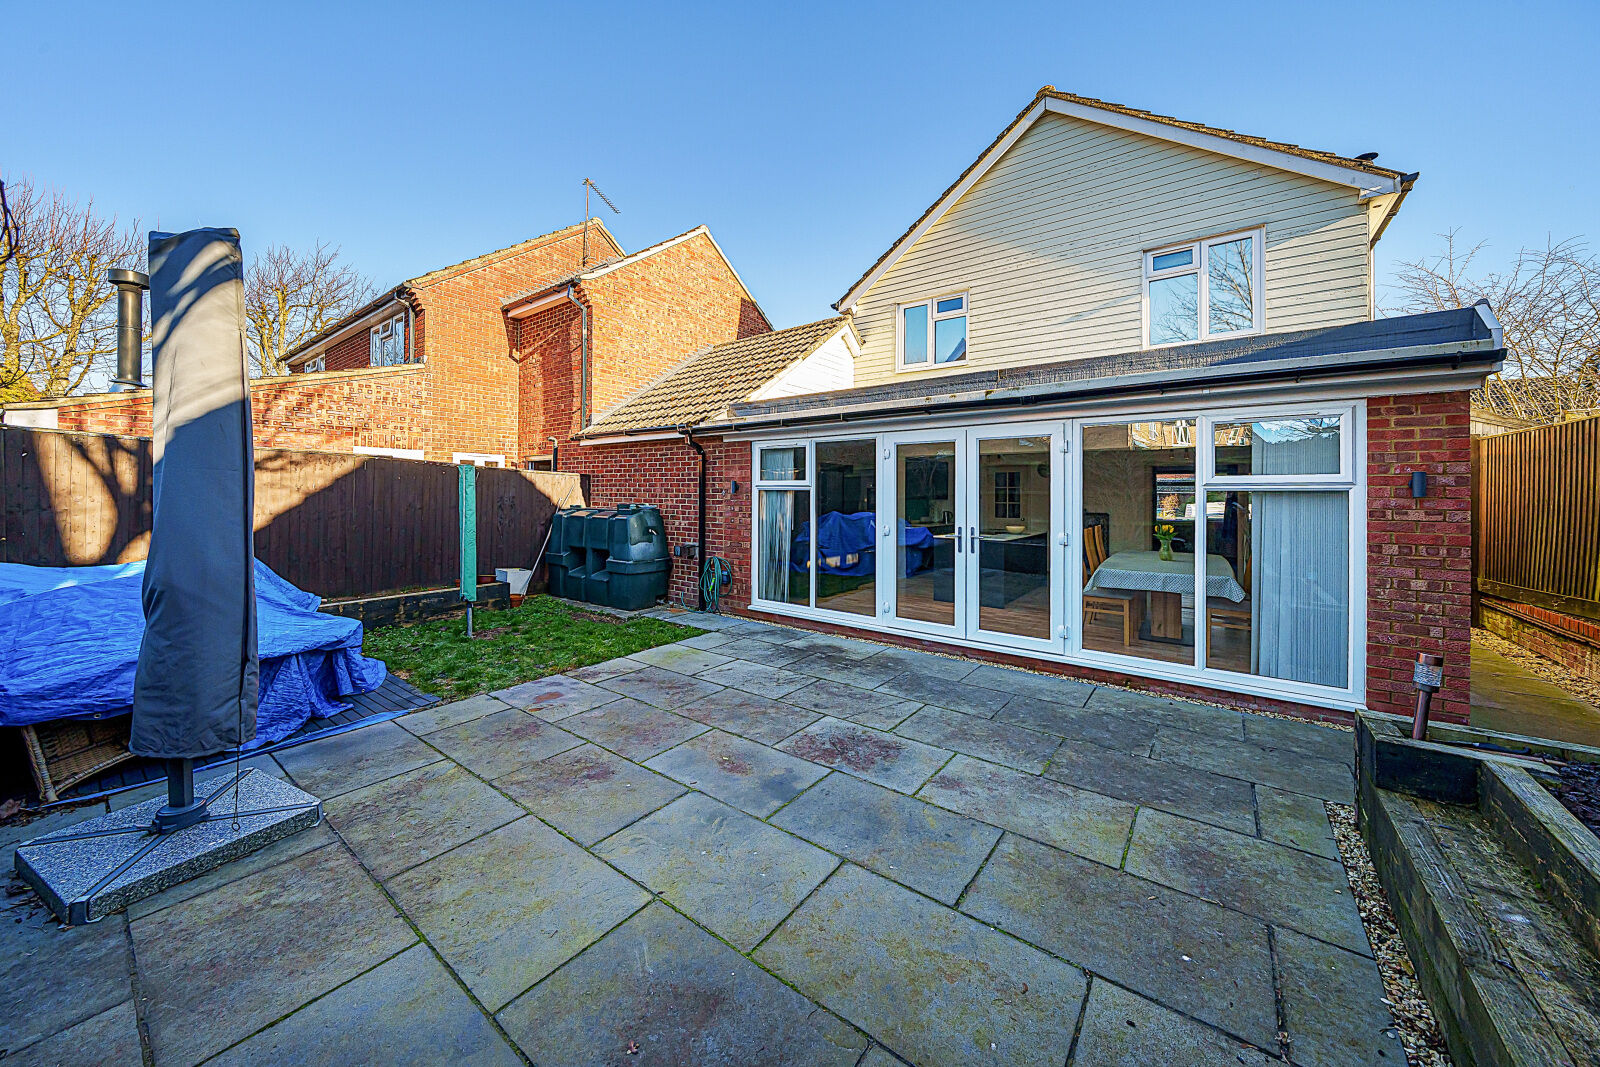 4 bedroom detached house for sale Thorningdown, Chilton, OX11, main image